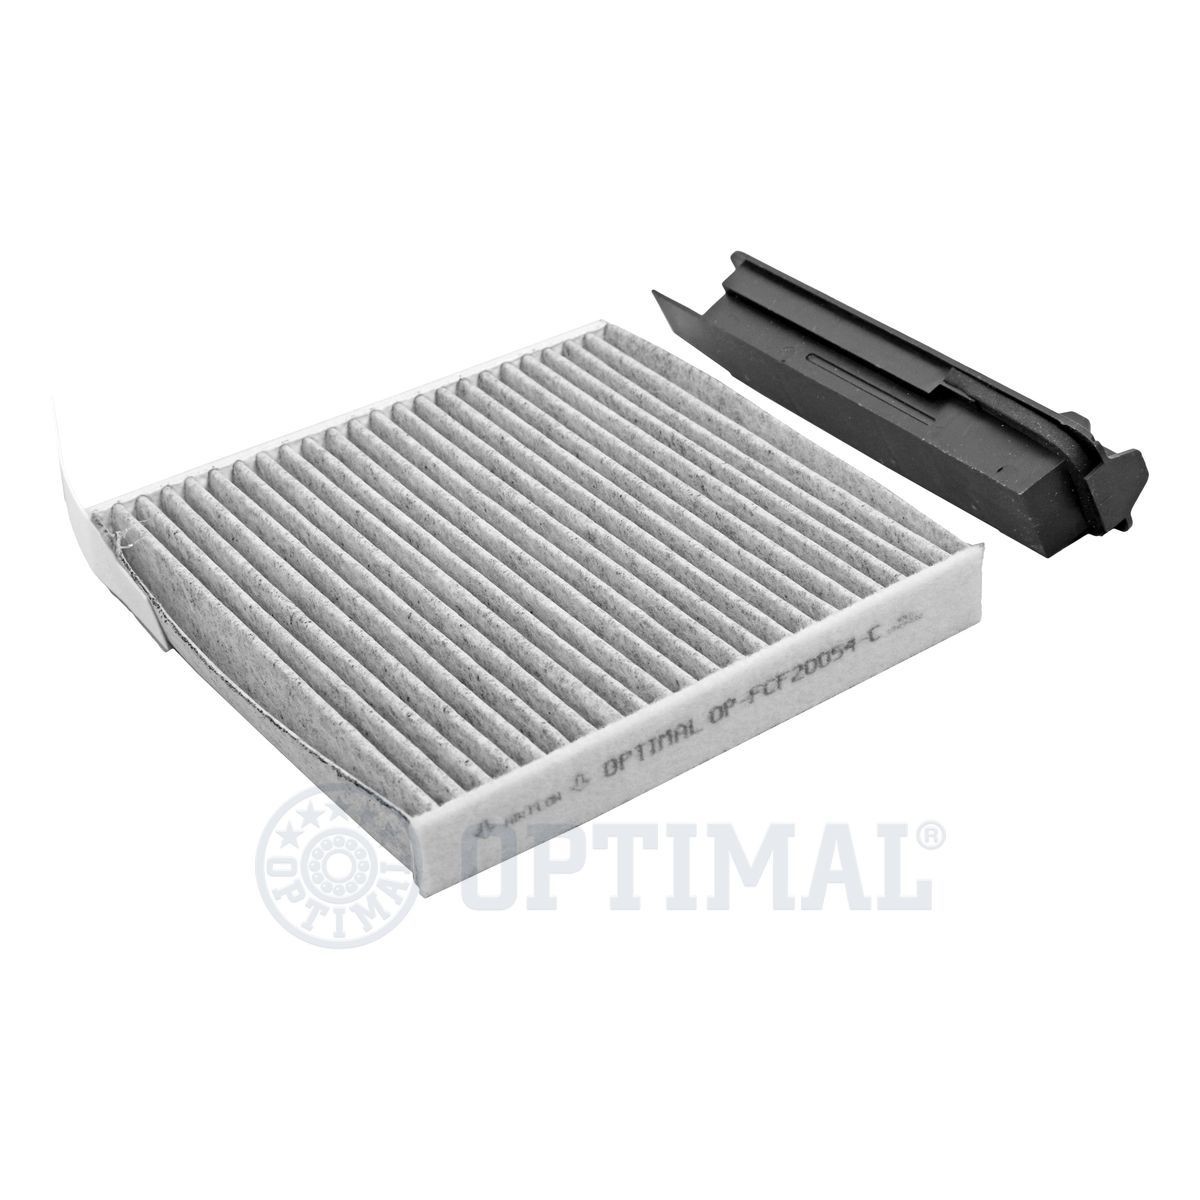 OPTIMAL Activated Carbon Filter, 183 mm x 182 mm x 25 mm Width: 182mm, Height: 25mm, Length: 183mm Cabin filter OP-FCF20054-C buy